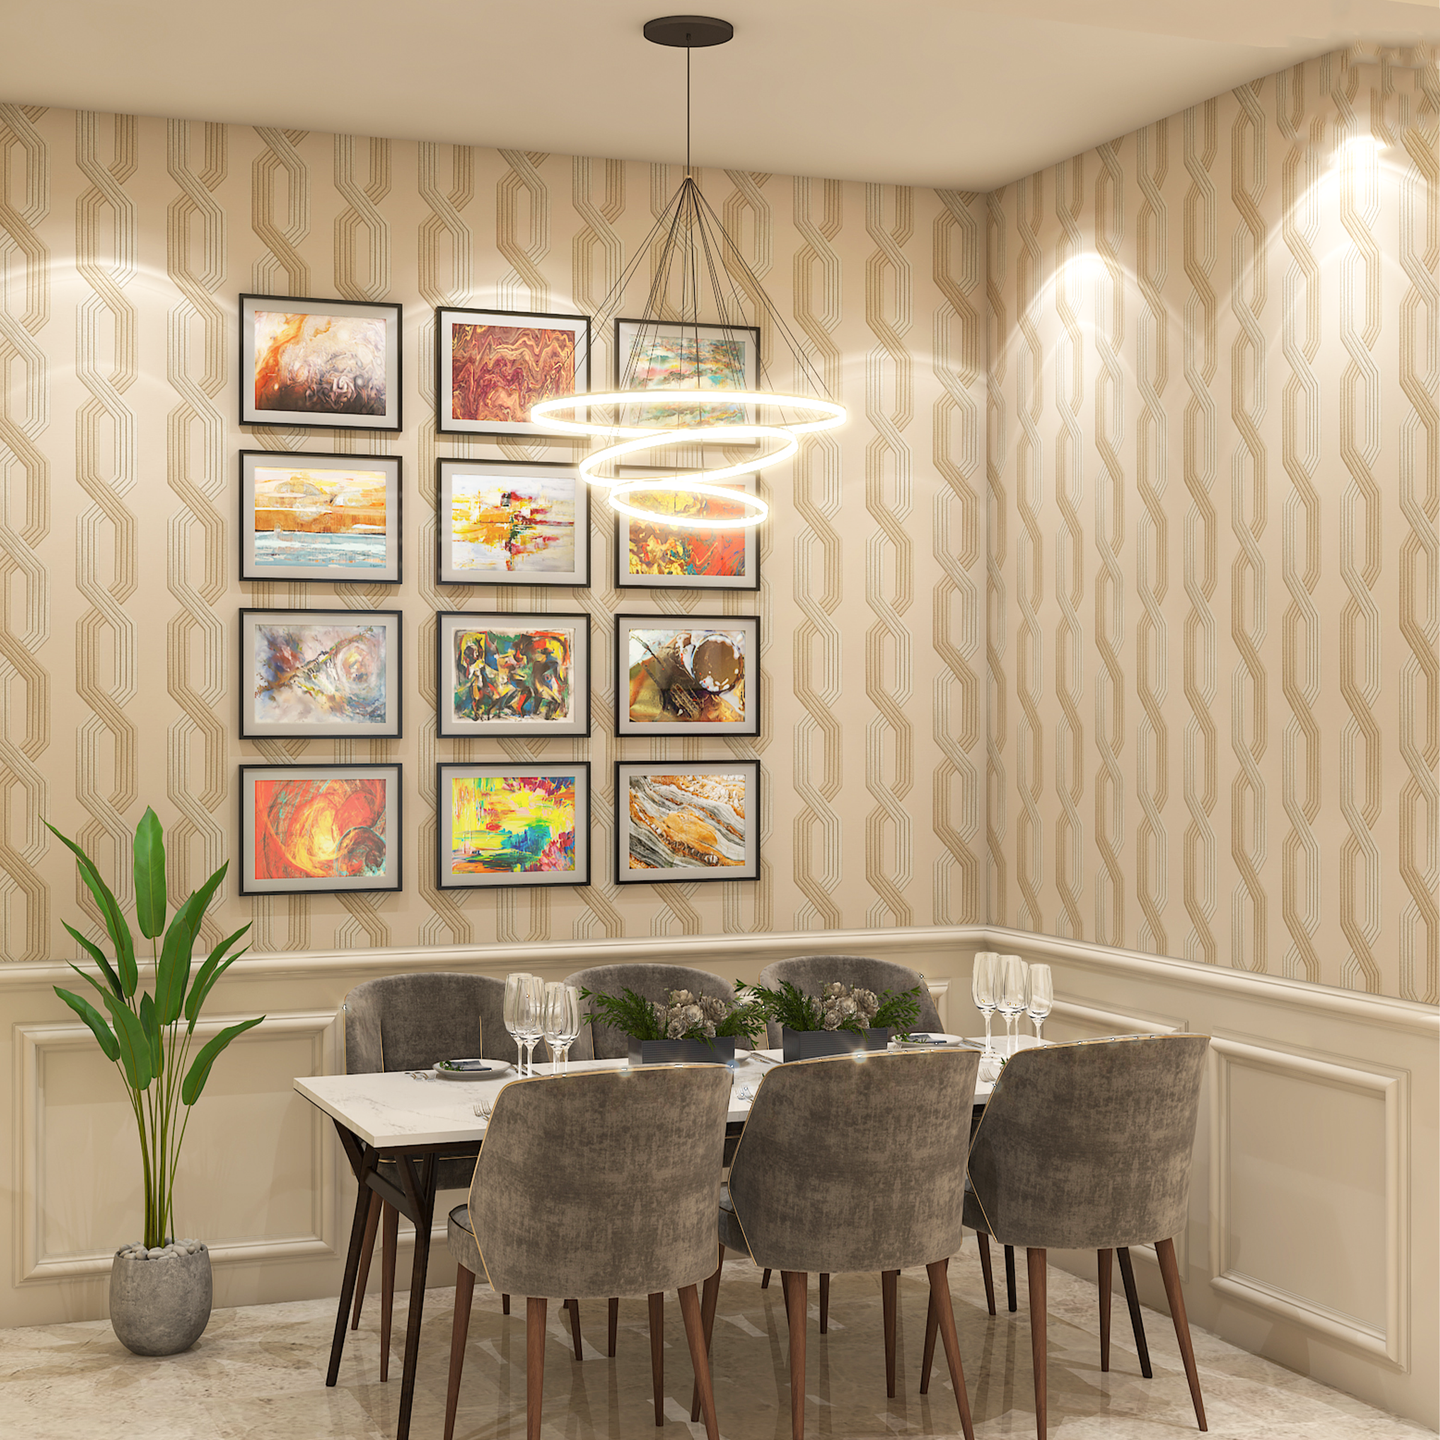 Modern 6-Seater Dining Room Design with Wallpaper and Wall Art - Livspace